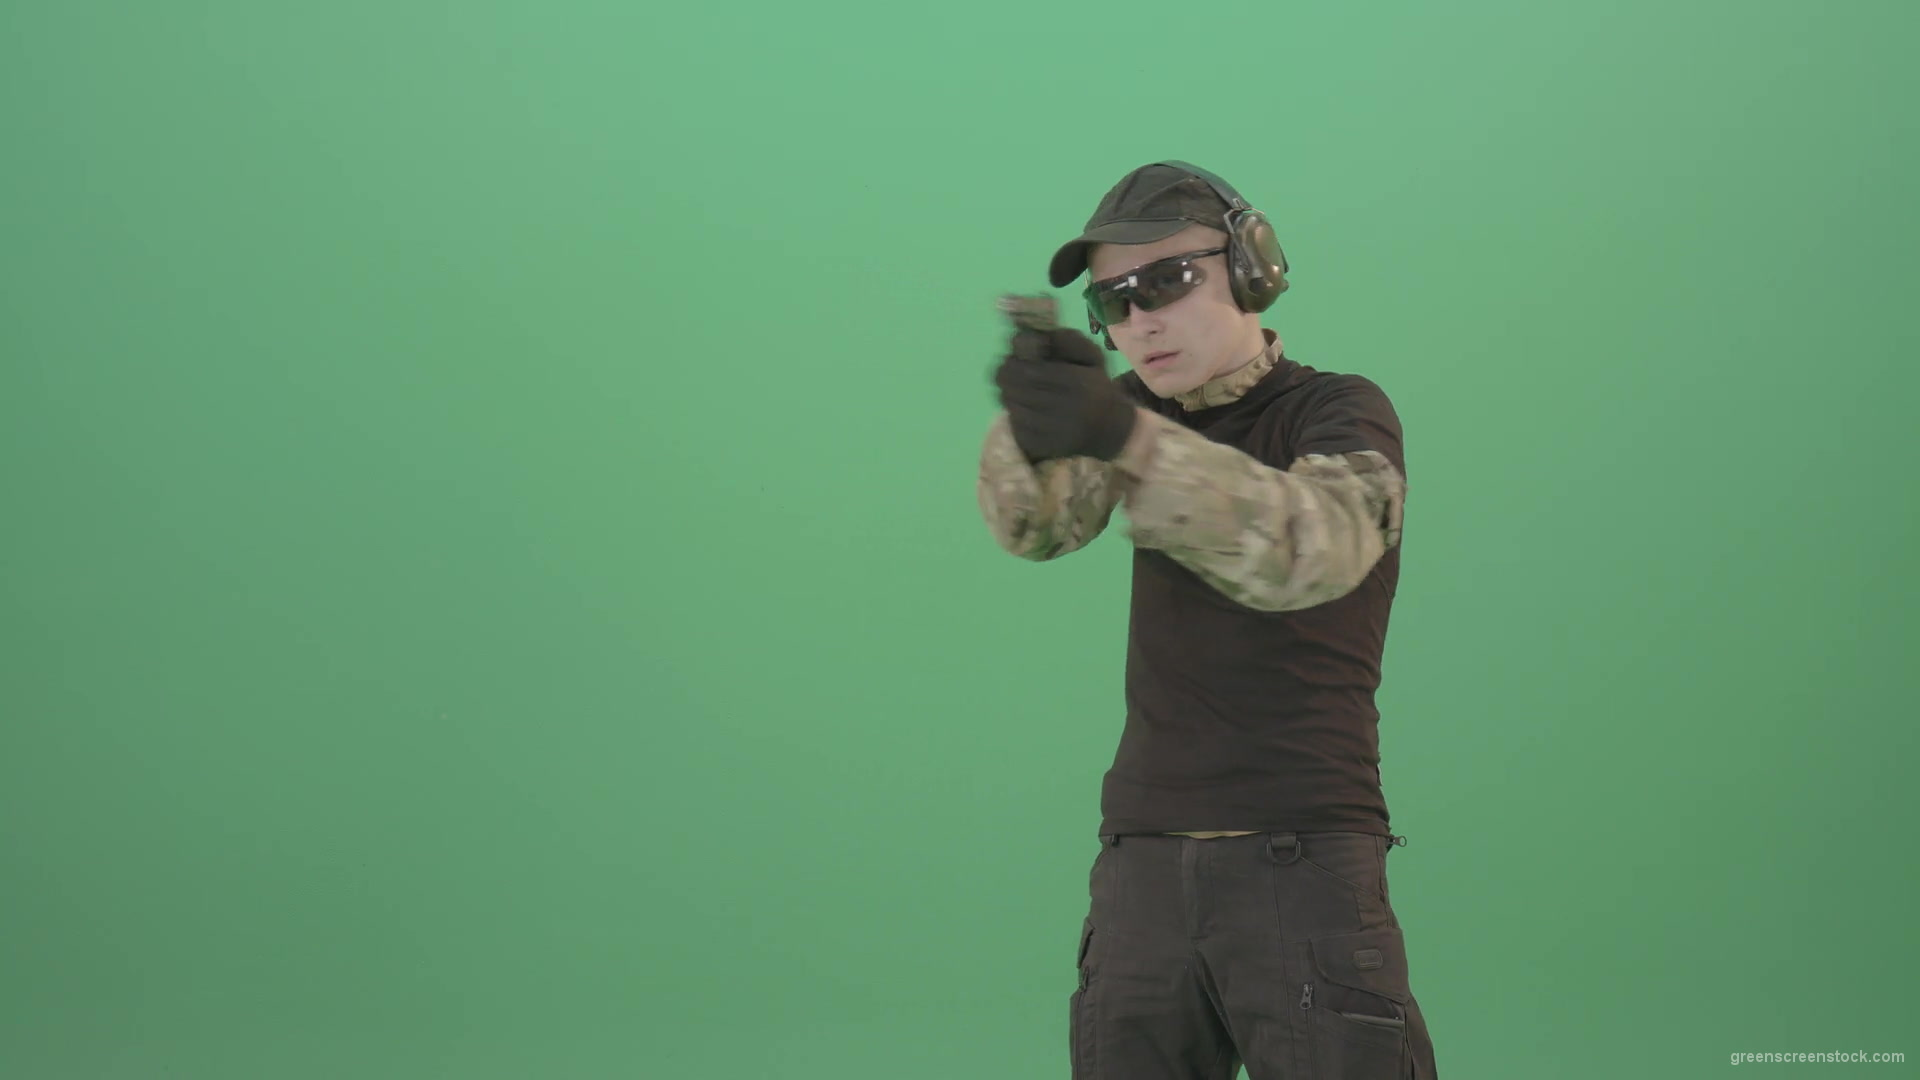 Young-boy-sodier-testin-small-pistol-gun-and-shooting-isolated-on-green-screen-4K-Video-Footage-1920_005 Green Screen Stock